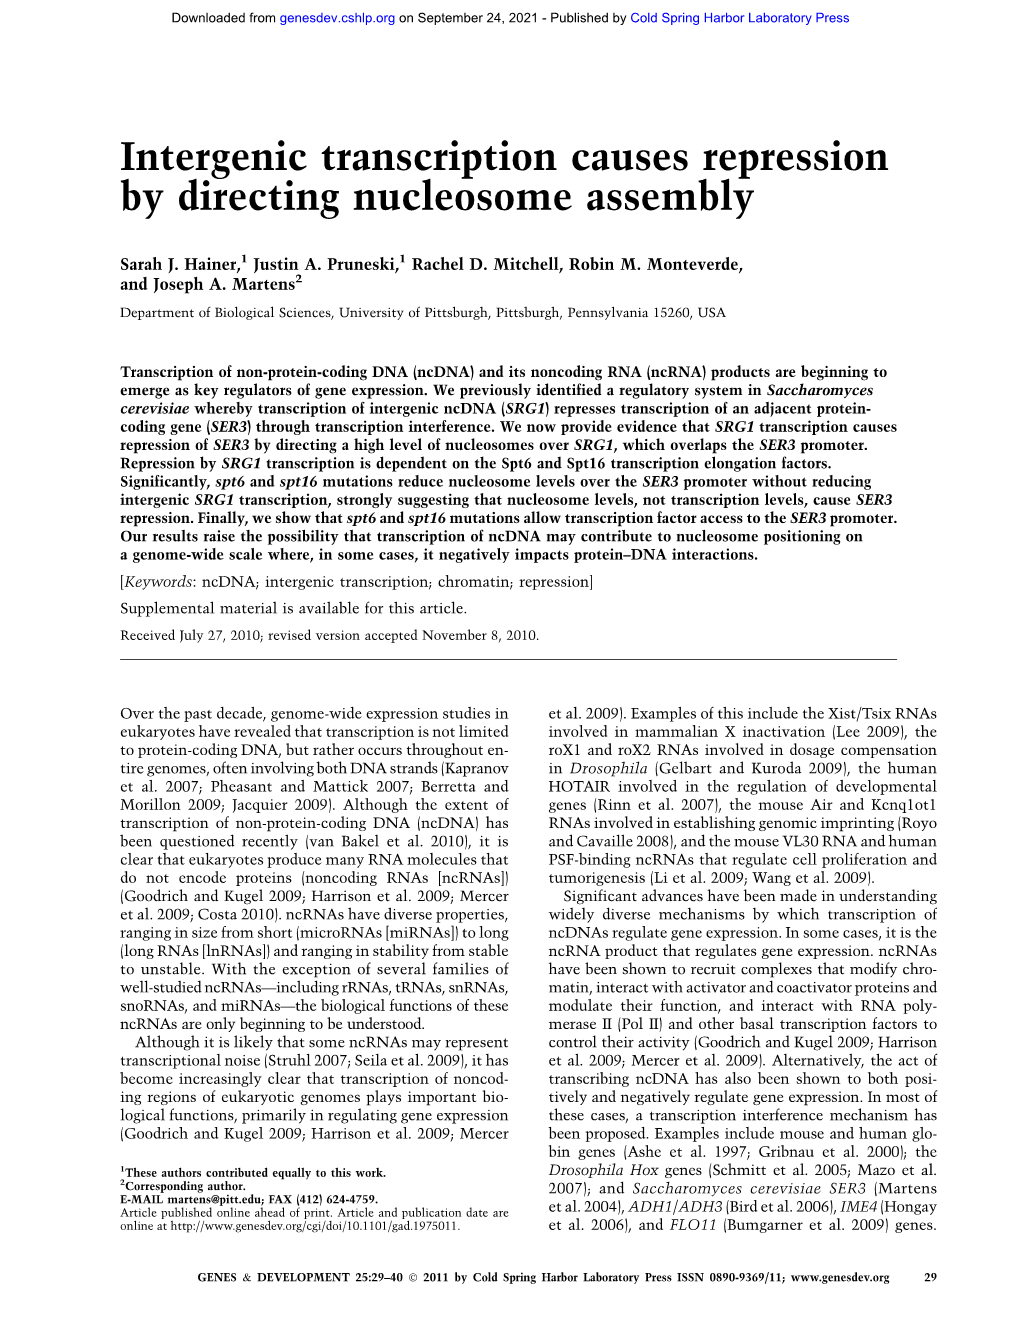 Intergenic Transcription Causes Repression by Directing Nucleosome Assembly